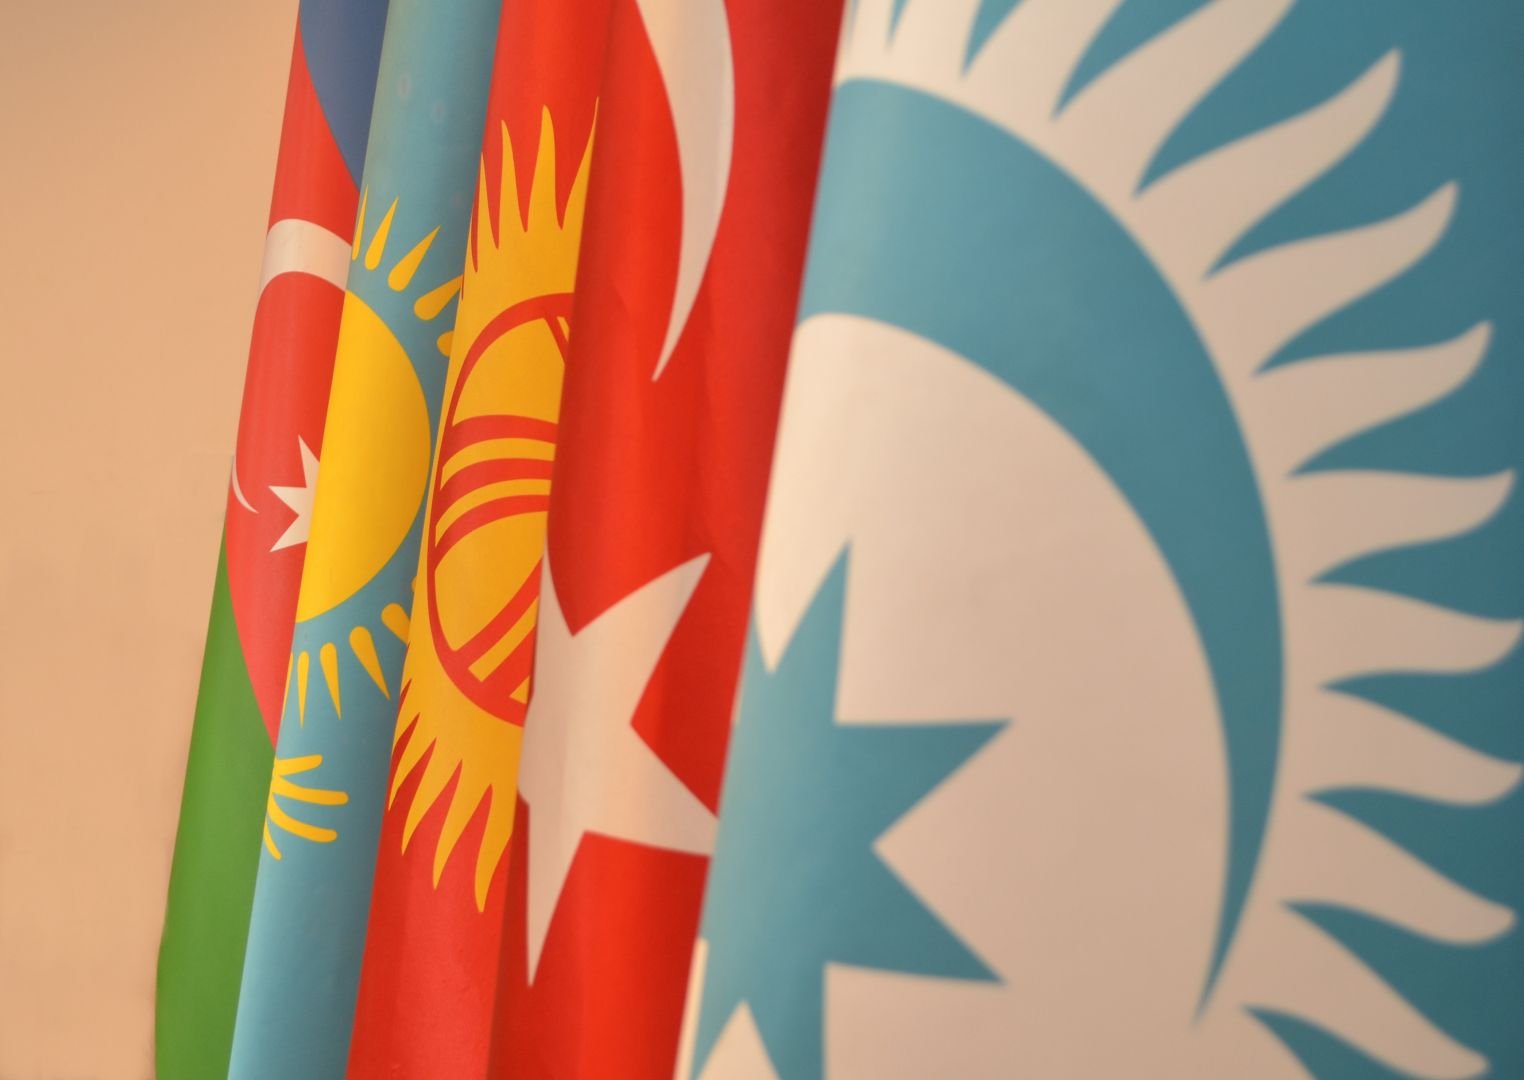 Organization of Turkic States to hold meeting on situation in Kazakhstan